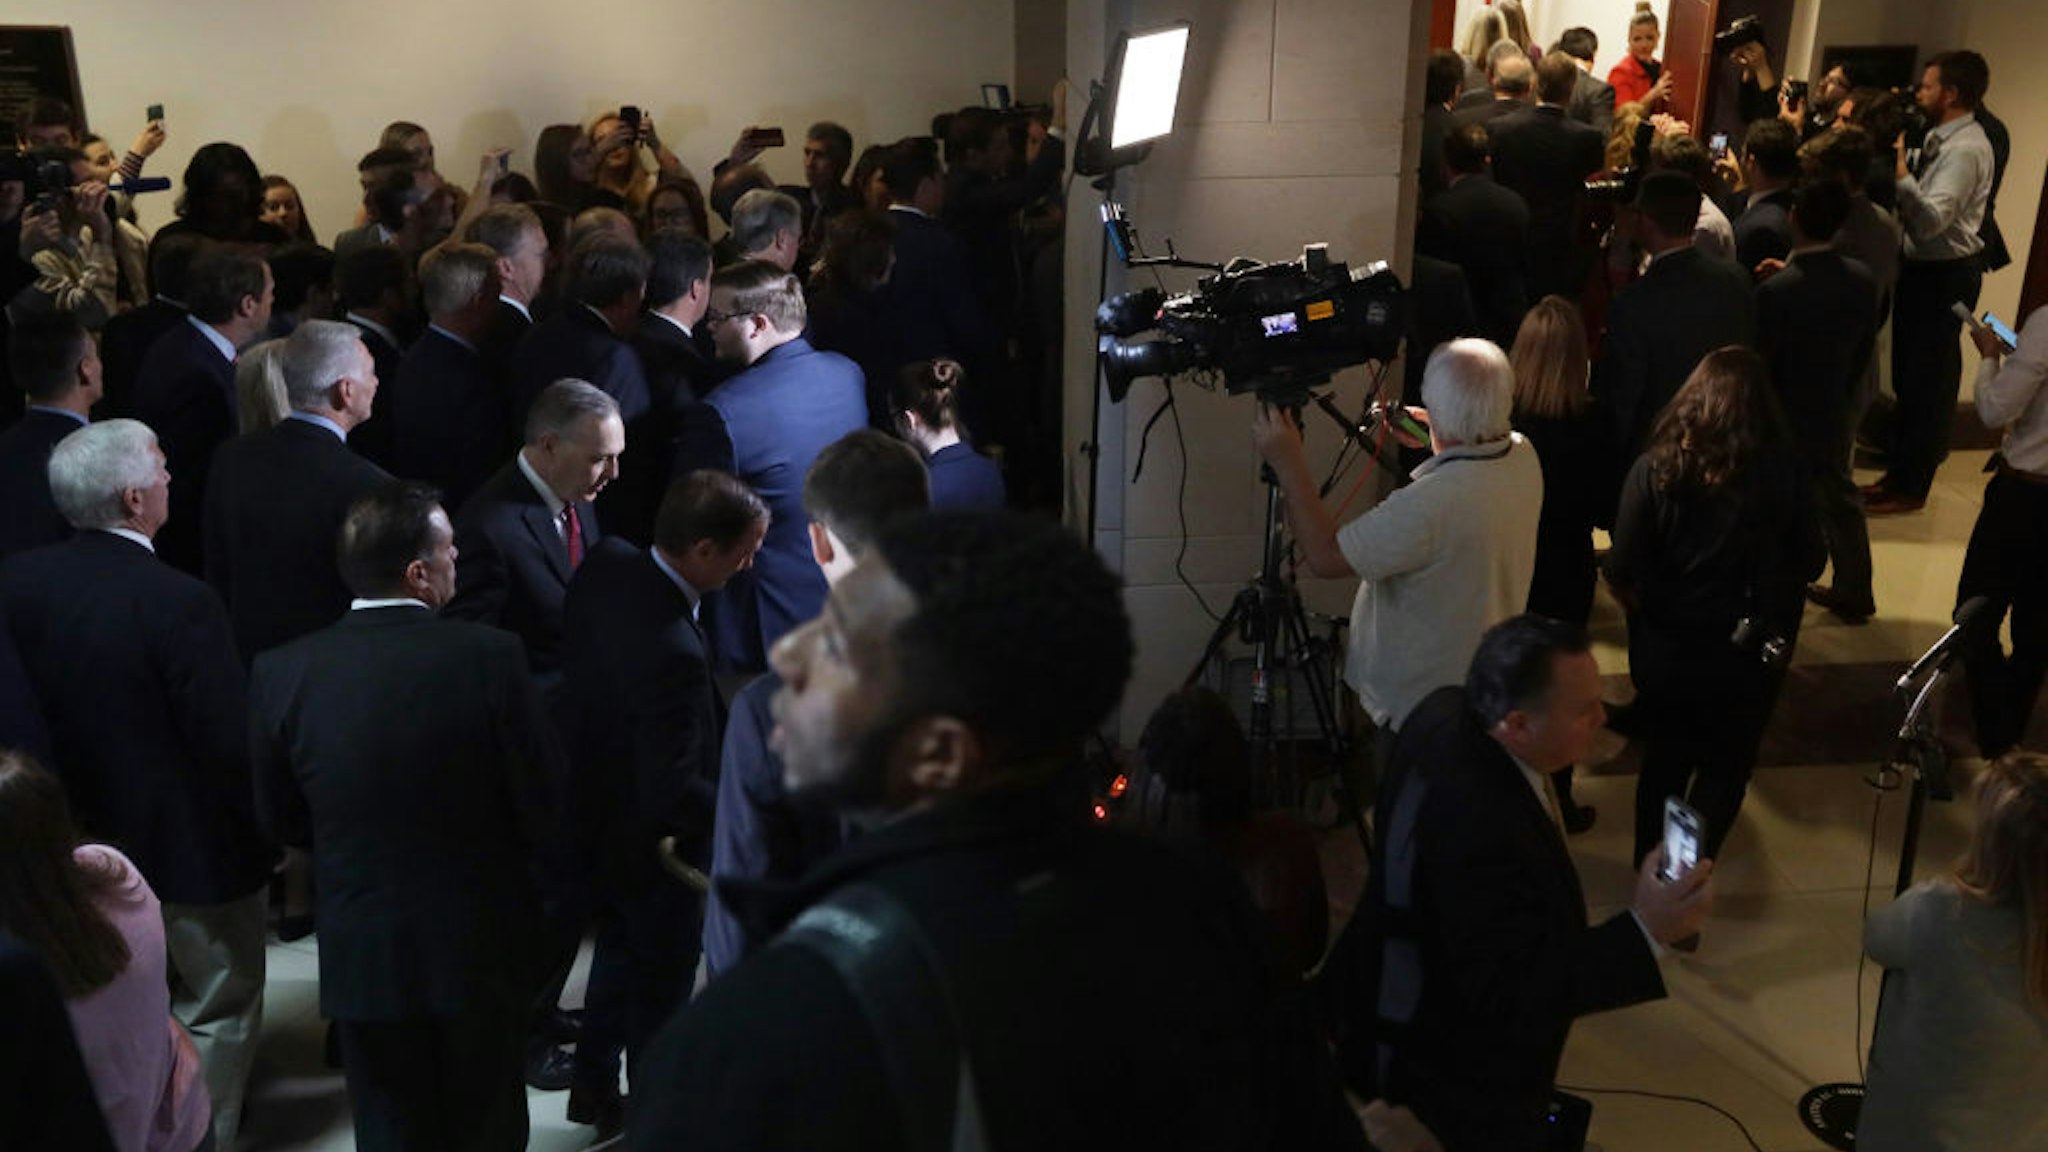 About two dozen House Republicans enter a sensitive compartmented information facility (SCIF) where a closed session before the House Intelligence, Foreign Affairs and Oversight committees takes place at the U.S. Capitol October 23, 2019 in Washington, DC. Rep. Gaetz held the press conference prior to the walk-in to call for “transparency in impeachment inquiry.” (Photo by Alex Wong/Getty Images)